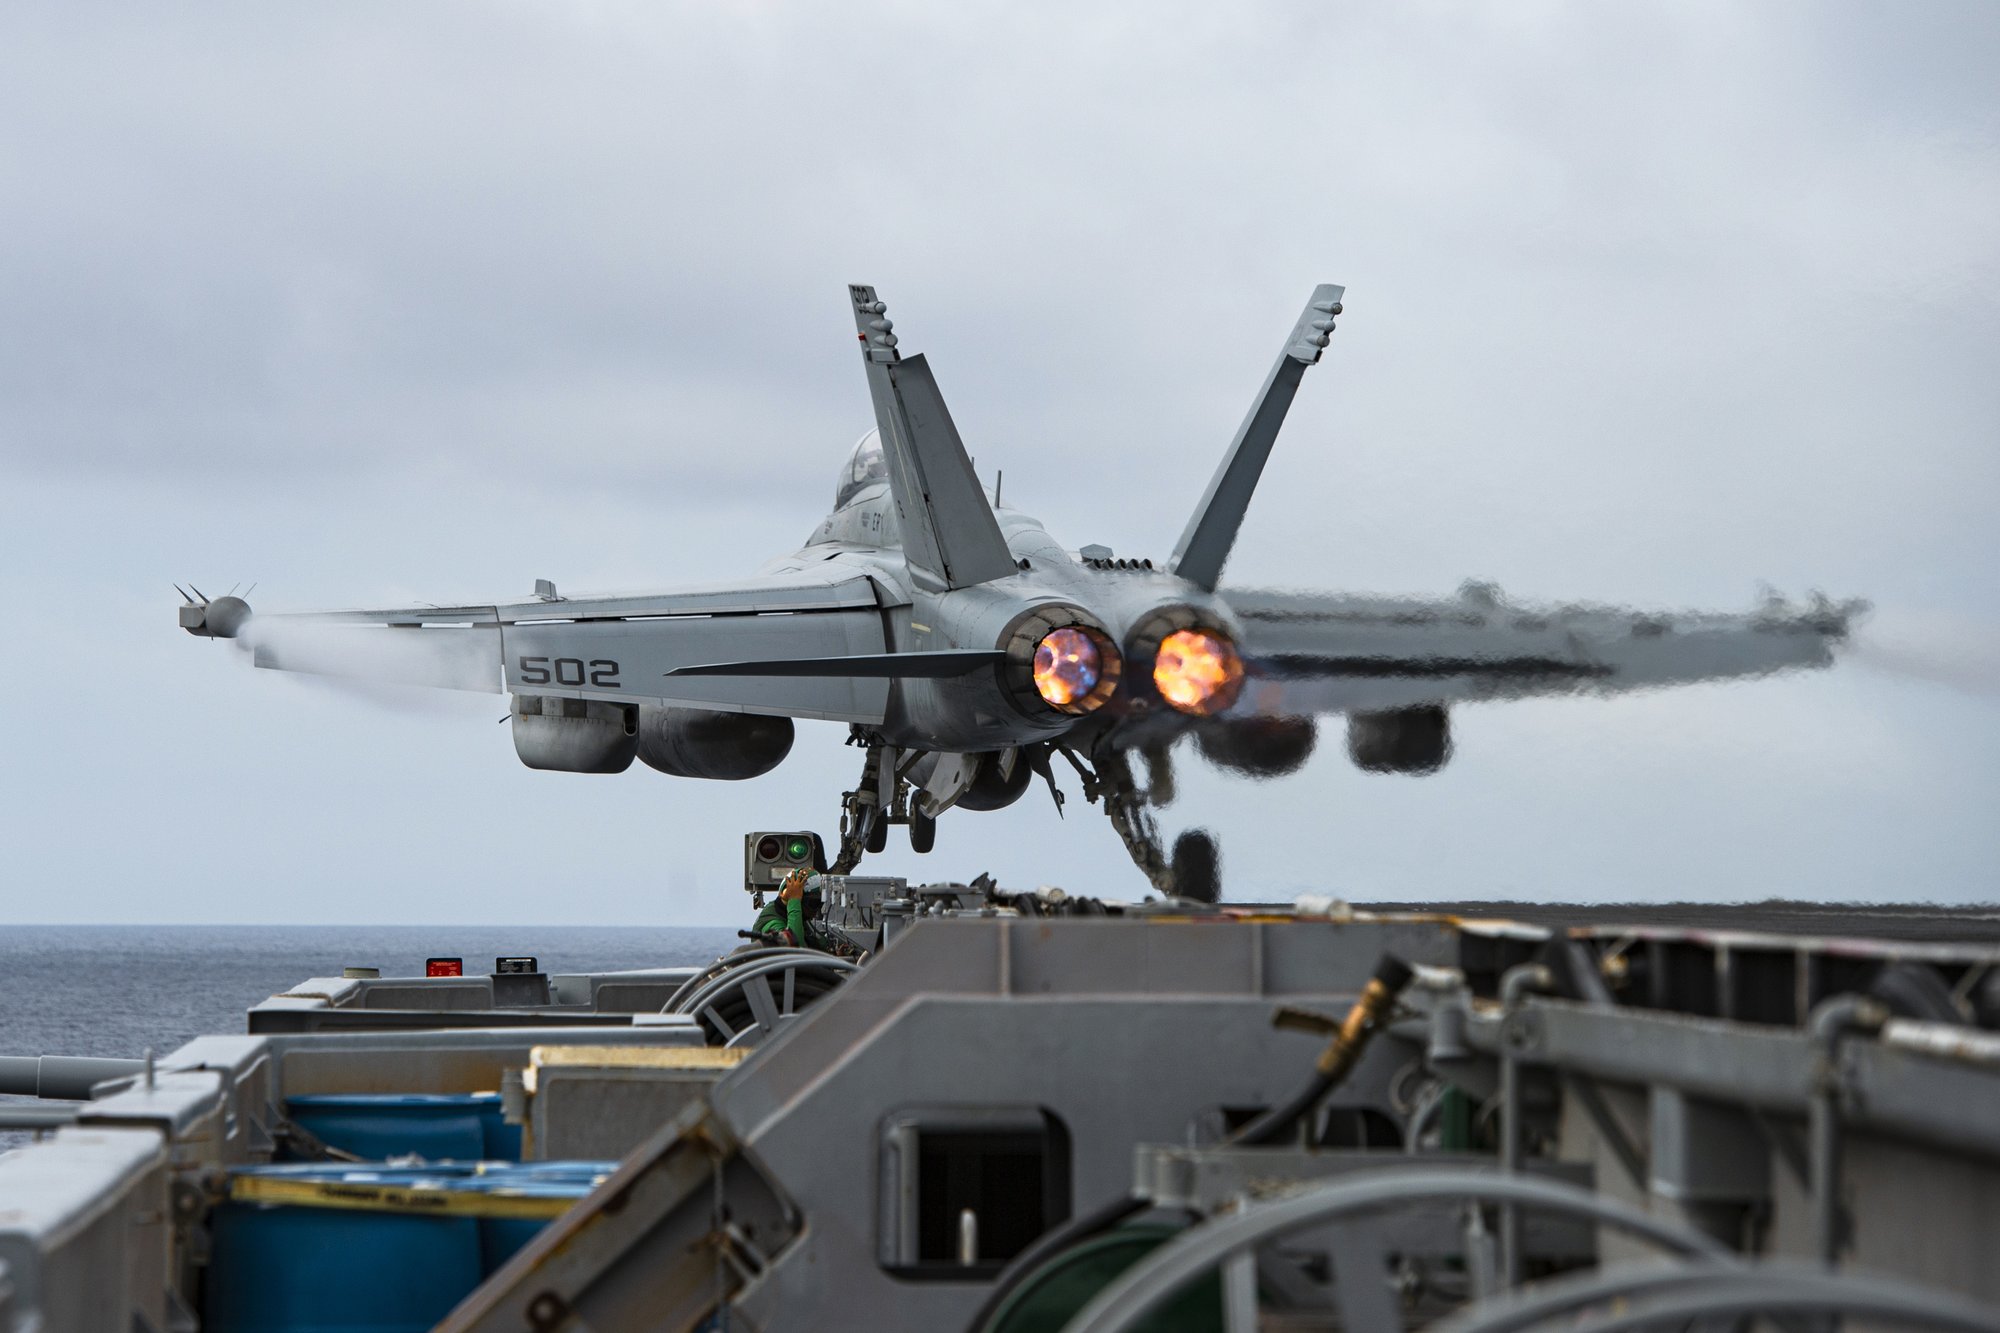 An E/A-18G Growler aircraft launches from the flight deck of the aircraft carrier USS Nimitz in the South China Sea, Sunday, Feb. 12, 2023, as Nimitz in U.S. 7th Fleet was conducting operations. The 7th Fleet based in Japan said Sunday that the USS Nimitz aircraft carrier strike group and the 13th Marine Expeditionary Unit have been conducting “integrated expeditionary strike force operations” in the South China Sea. (Mass Communication Specialist 3rd Class Joseph Calabrese/U.S. Navy via AP)